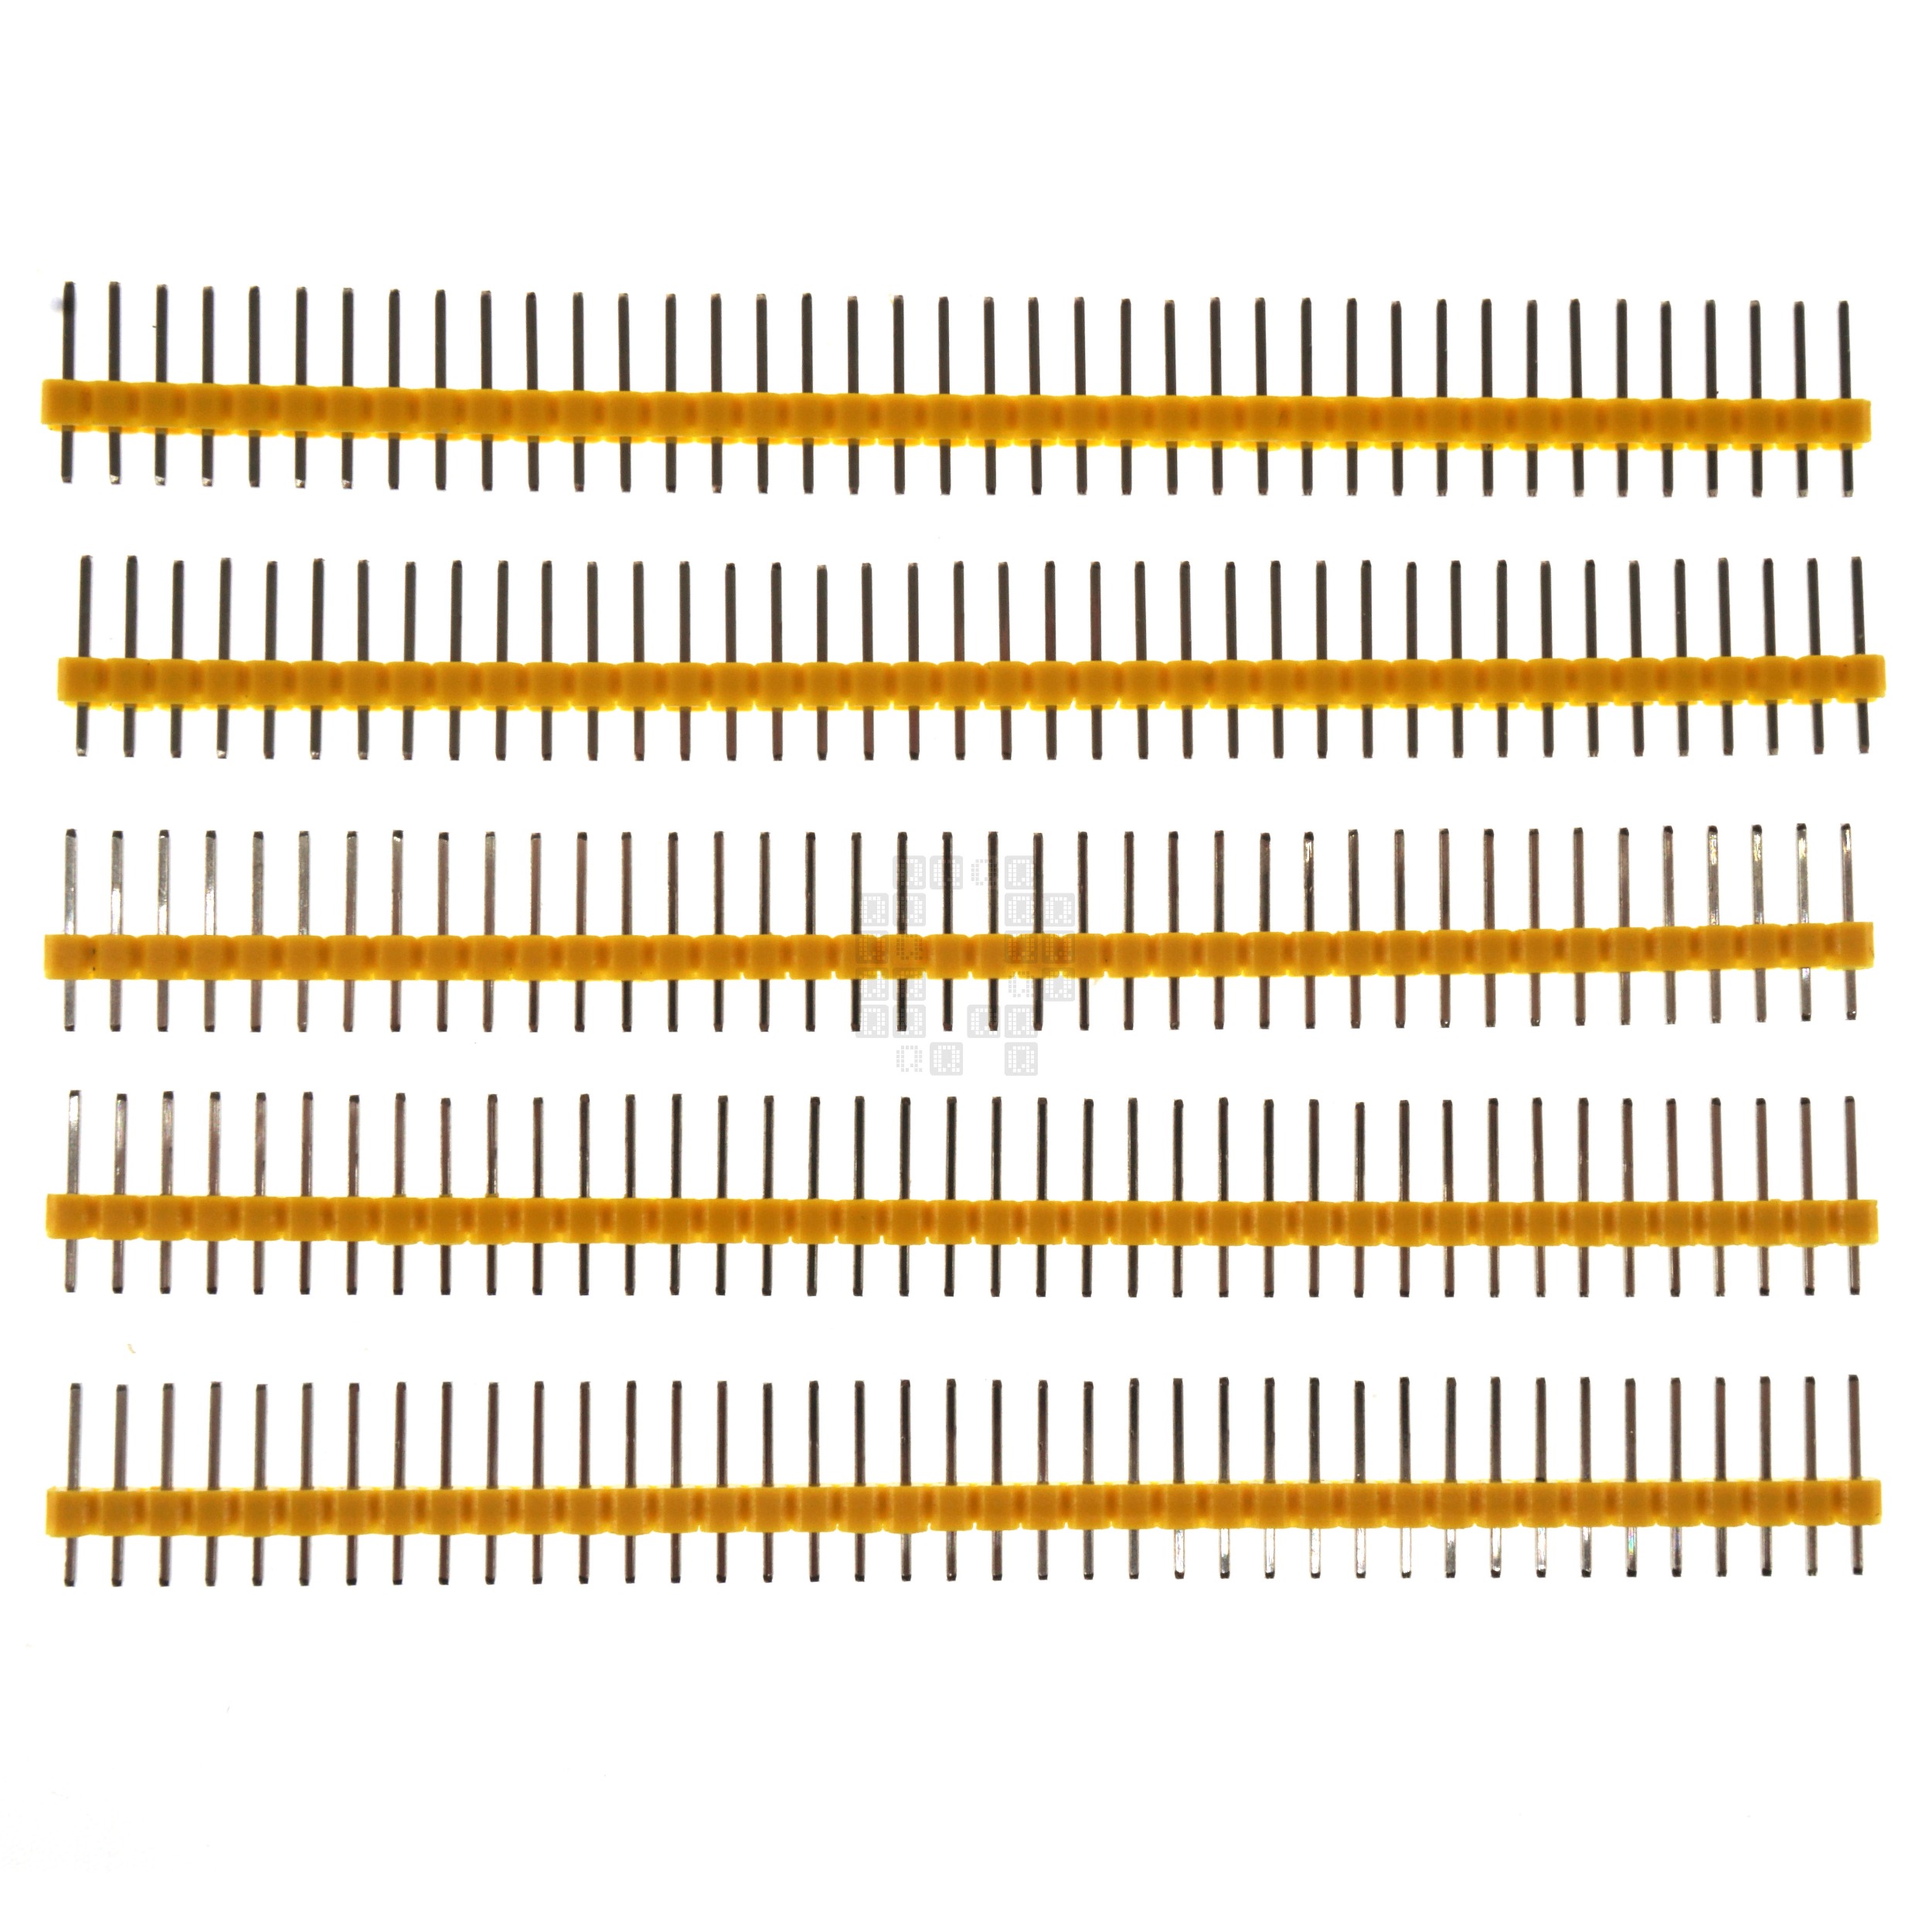 1x40 Pin Male Breakable Single Row Pin Header, 2.54mm Pitch, 11.2mm Height, 5-Pack, Yellow